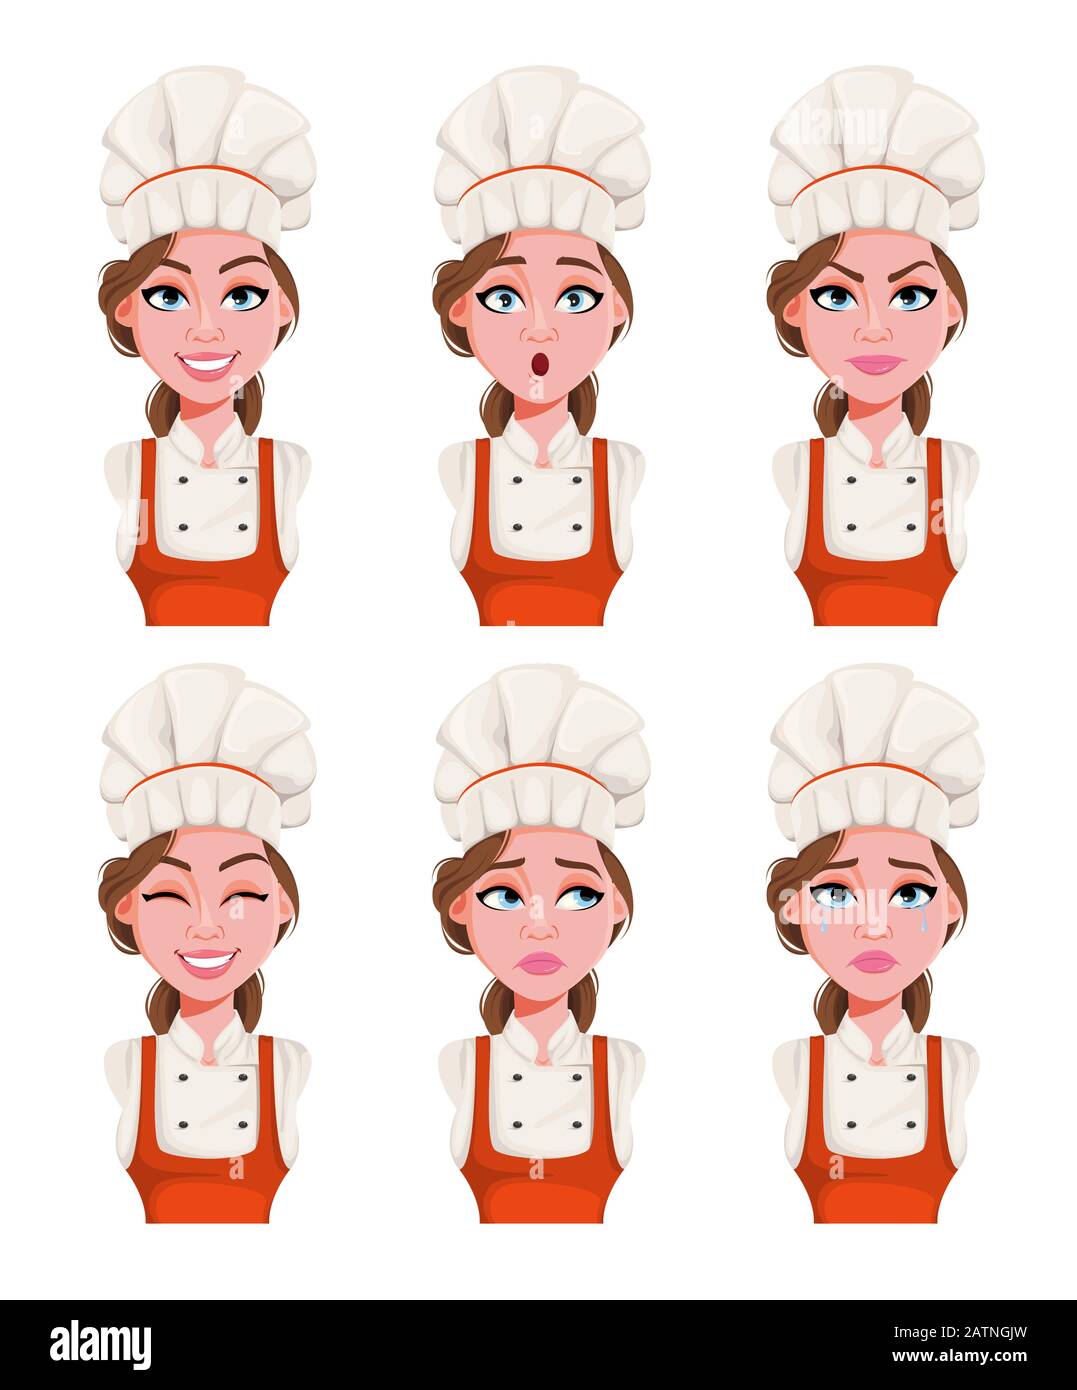 Cartoon Chef Accessories Set Chef Surrounded By Kitchen And